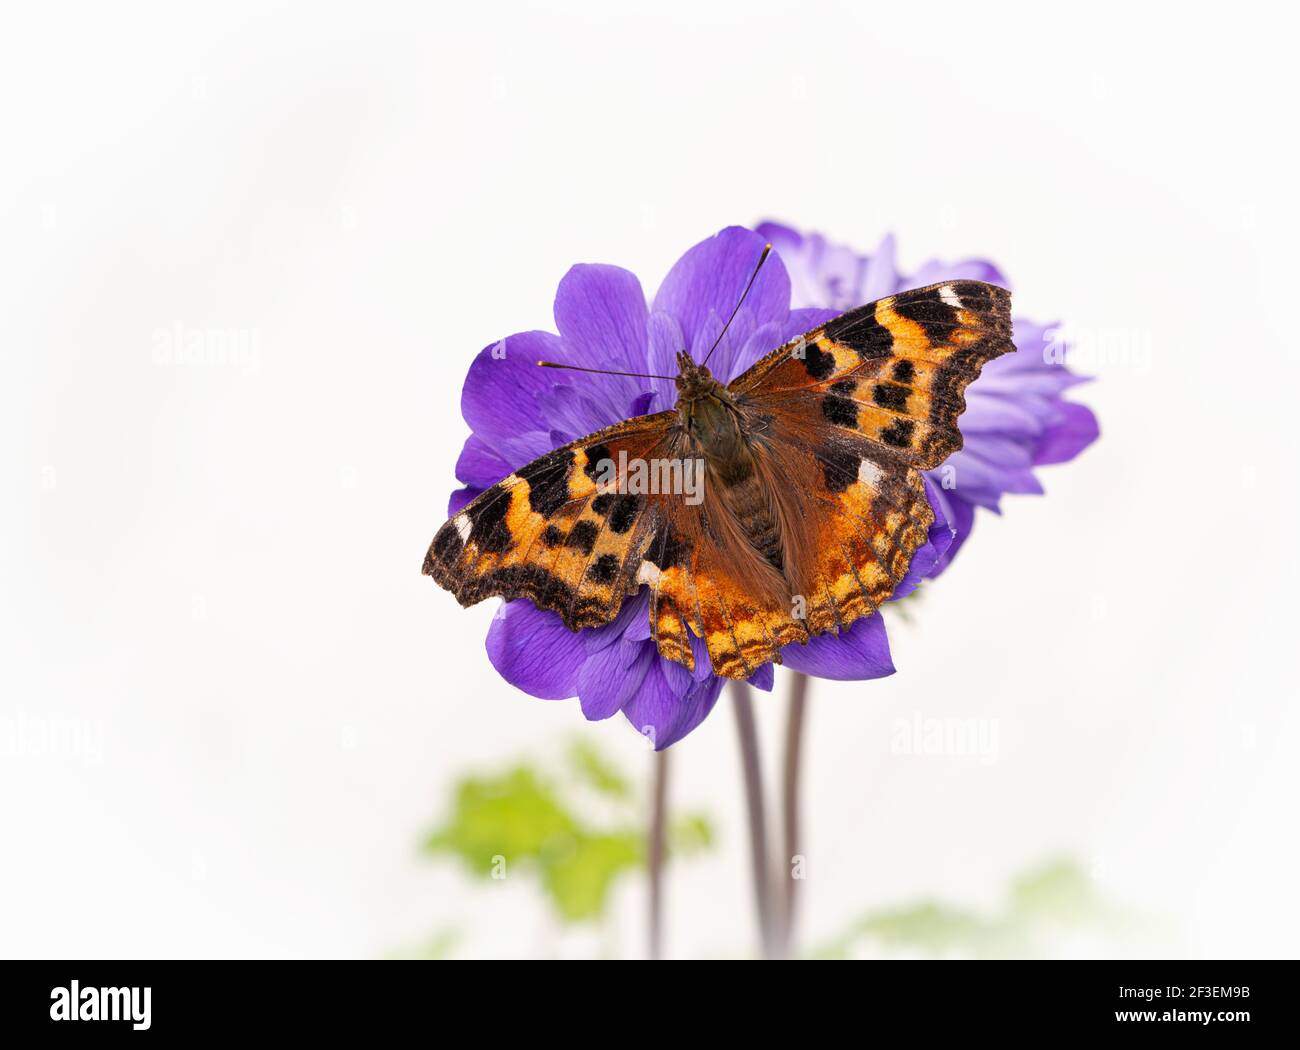 Macro of a tortoiseshell butterfly resting on a purple anemone flower, on a white floral background Stock Photo